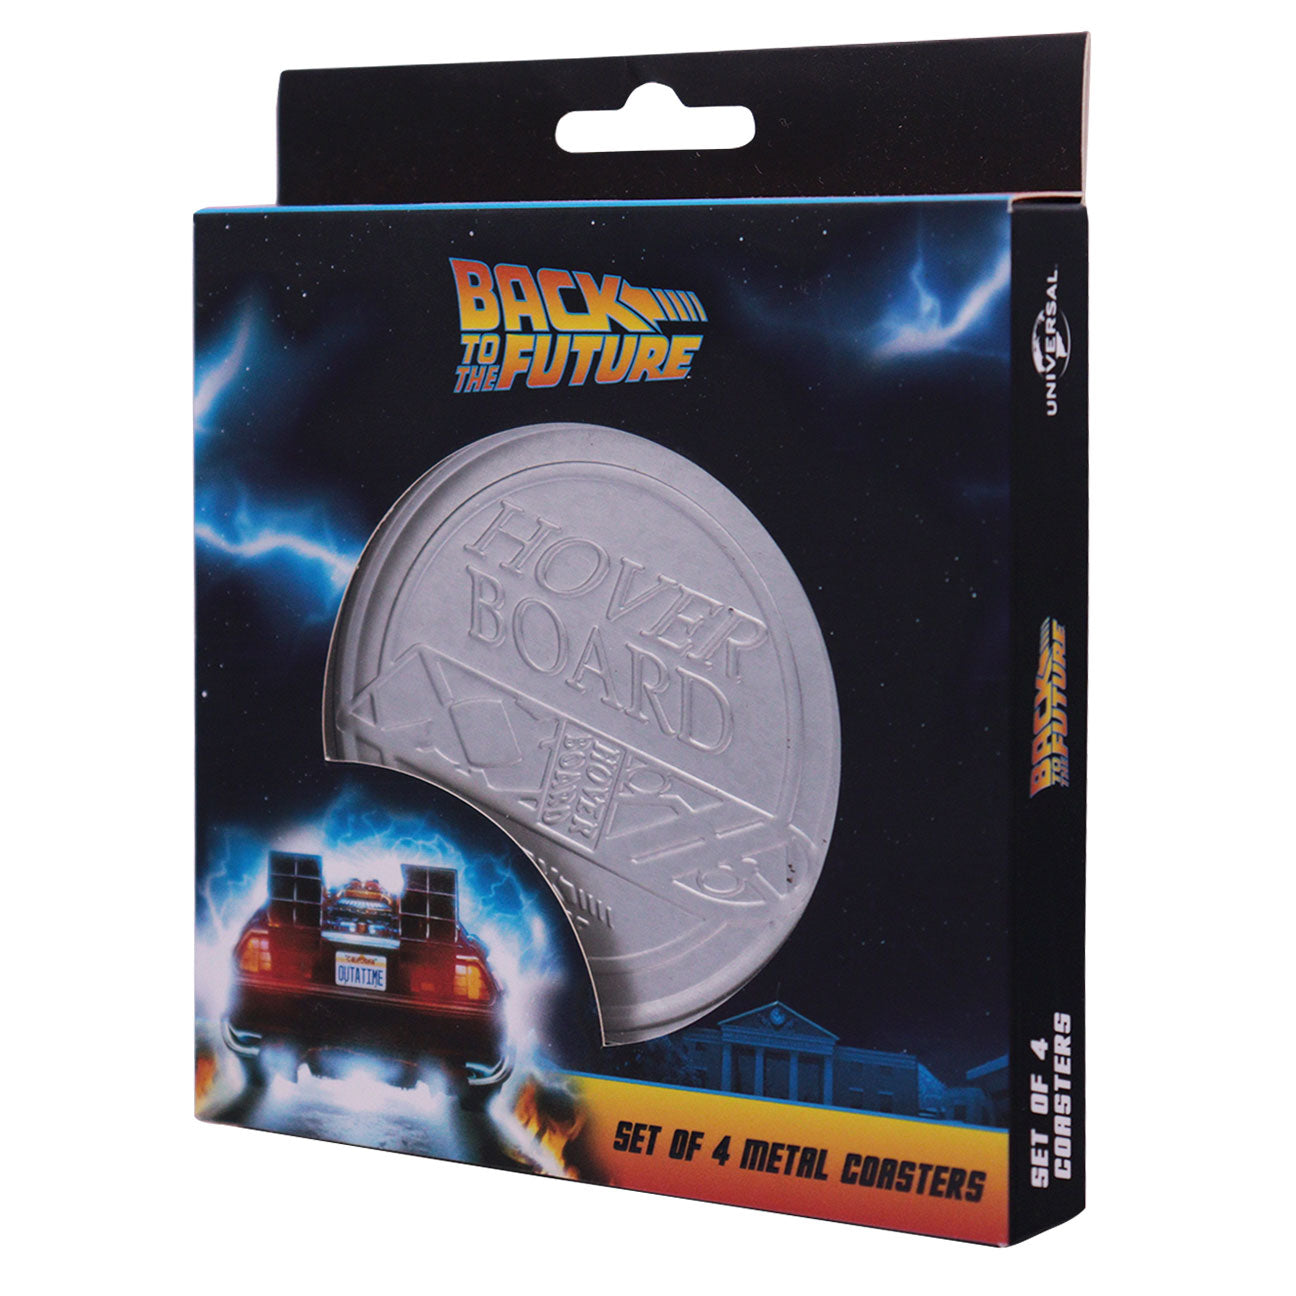 Back to the Future Set of 4 Embossed Metal Coasters